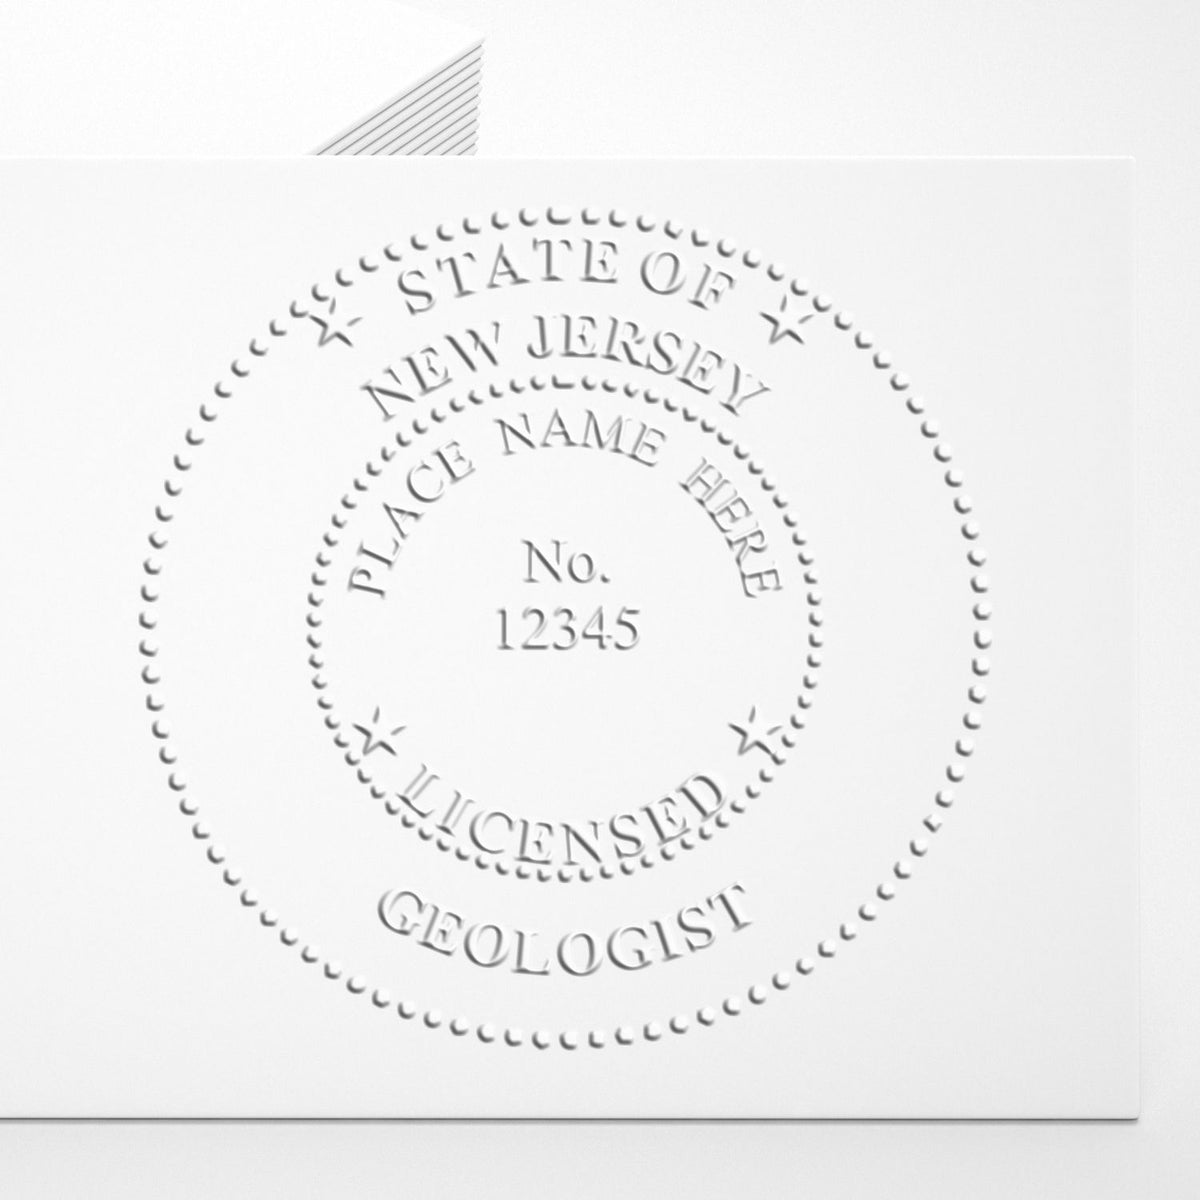 An in use photo of the Gift New Jersey Geologist Seal showing a sample imprint on a cardstock